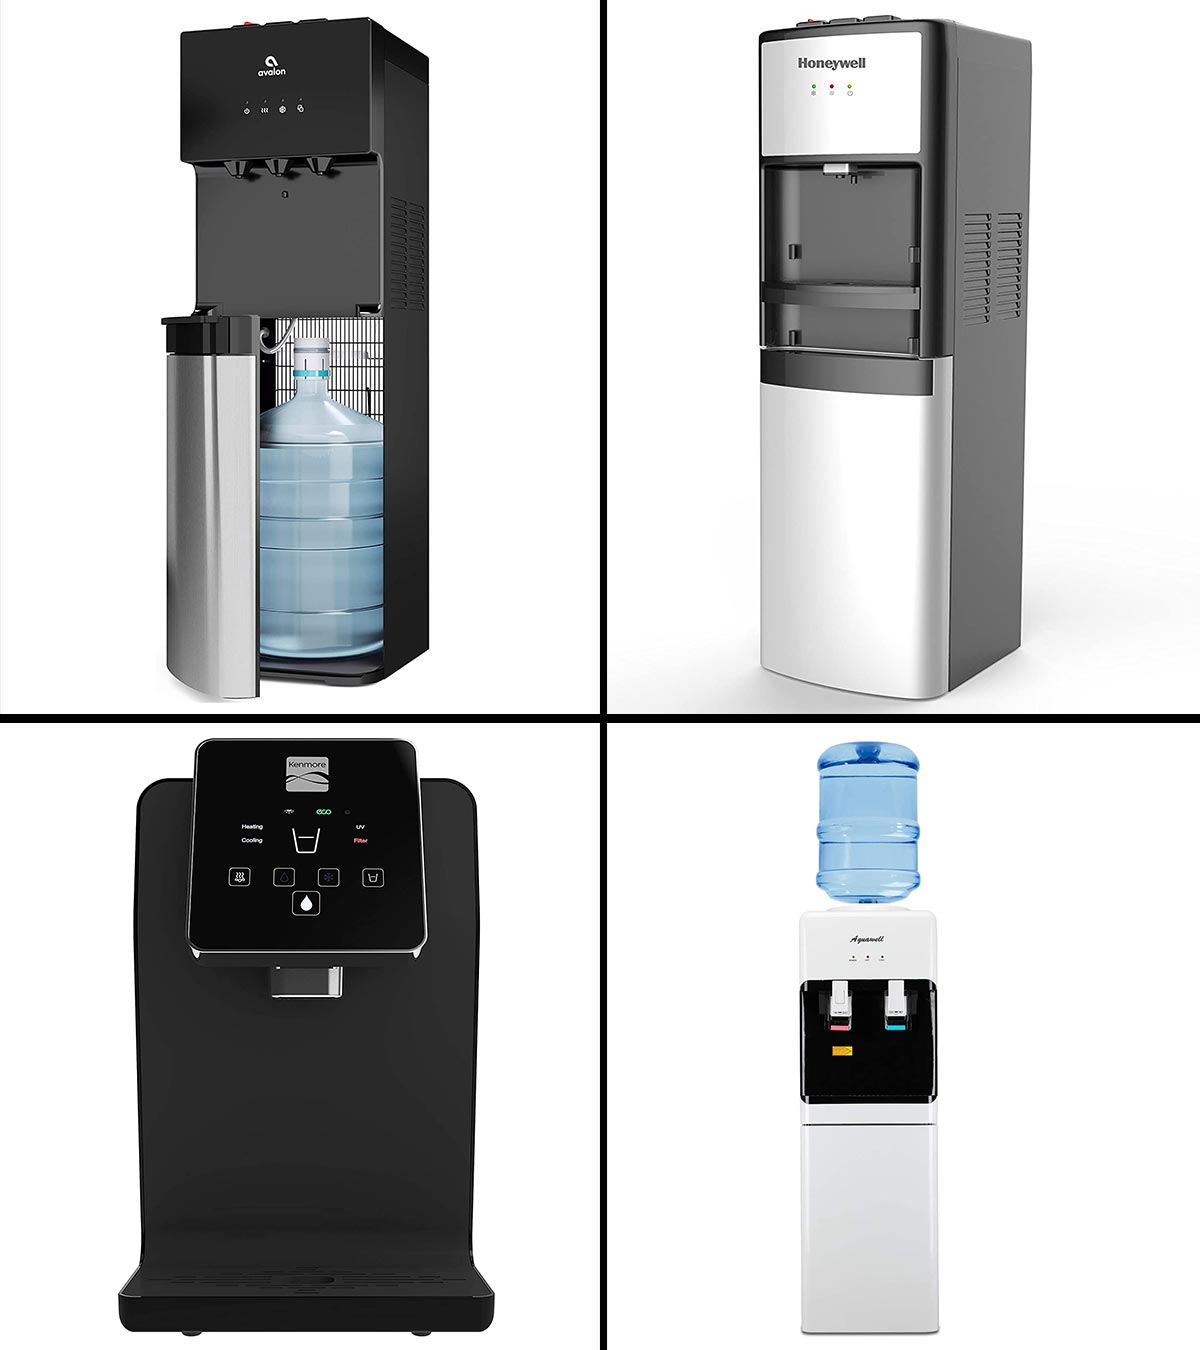 Giantex Top Loading Water Cooler Dispenser 5 Gallon Normal Temperature Water and Hot Bottle Load Electric Home with Storage Cabi